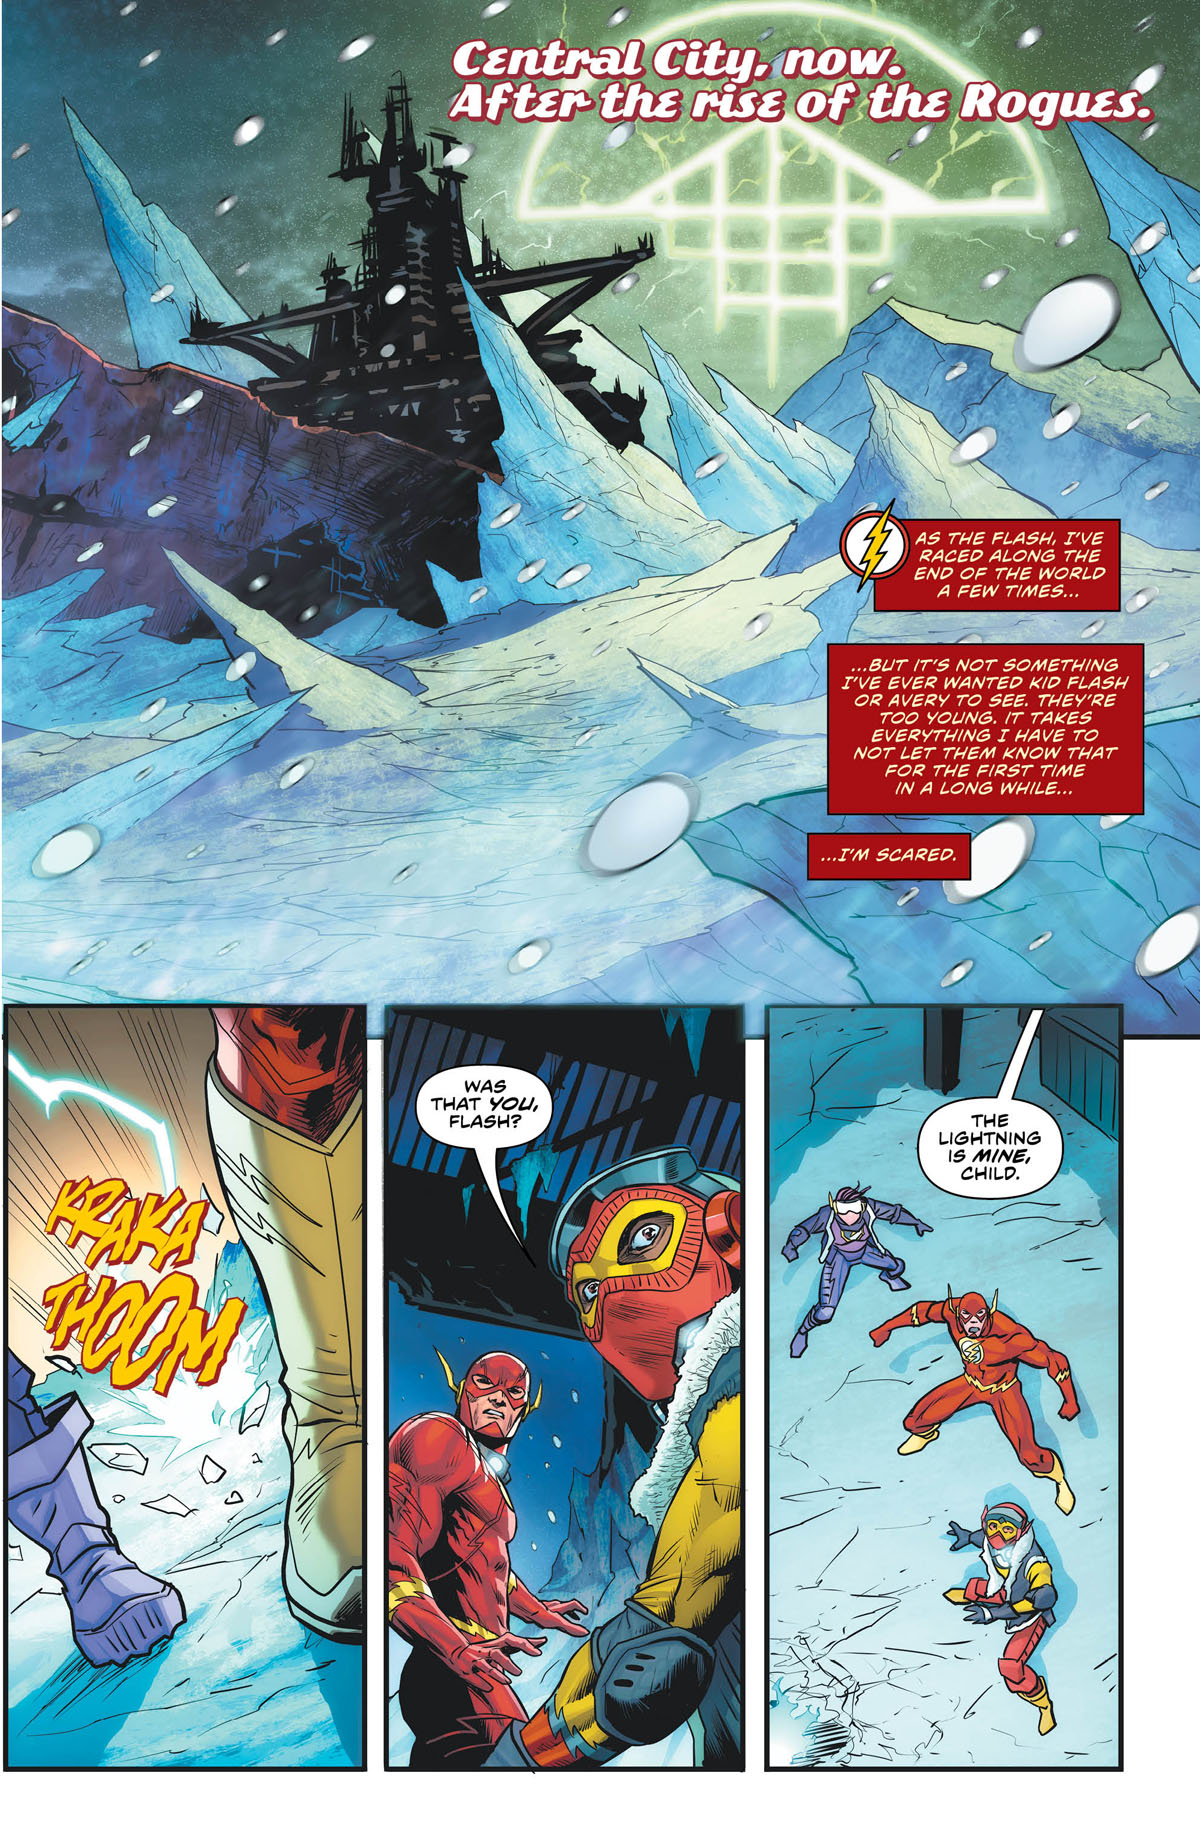 The Flash #84 page 3